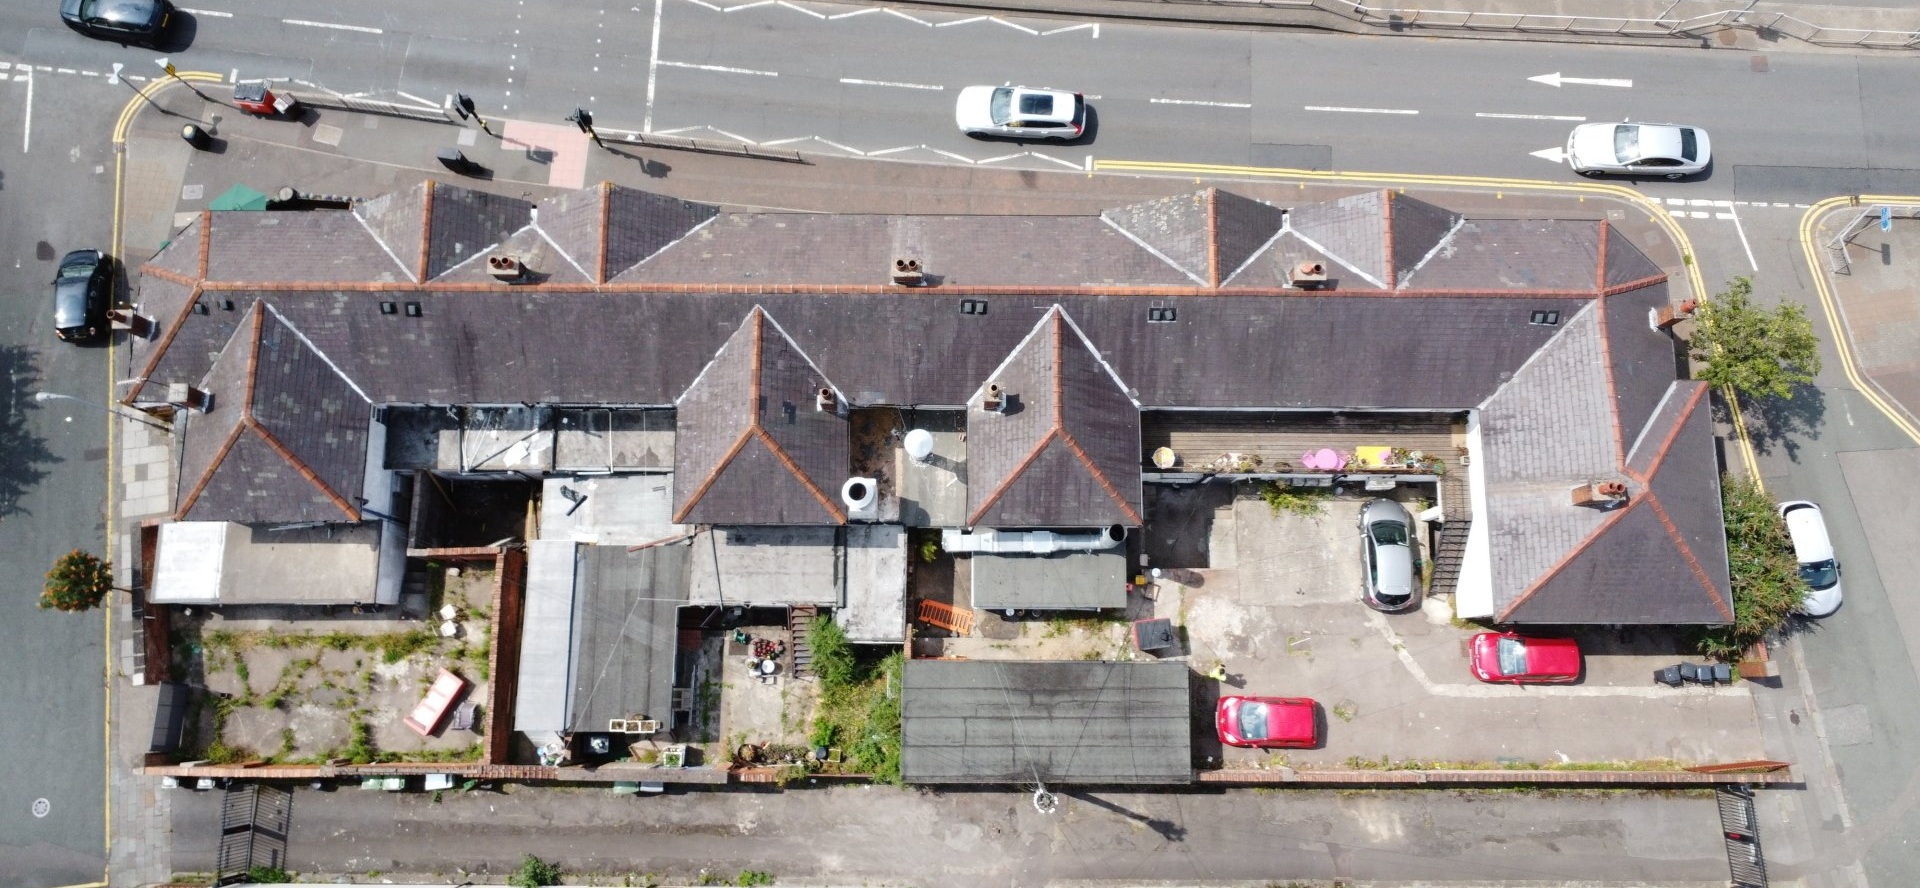 Drone Roof Inspections in the South East